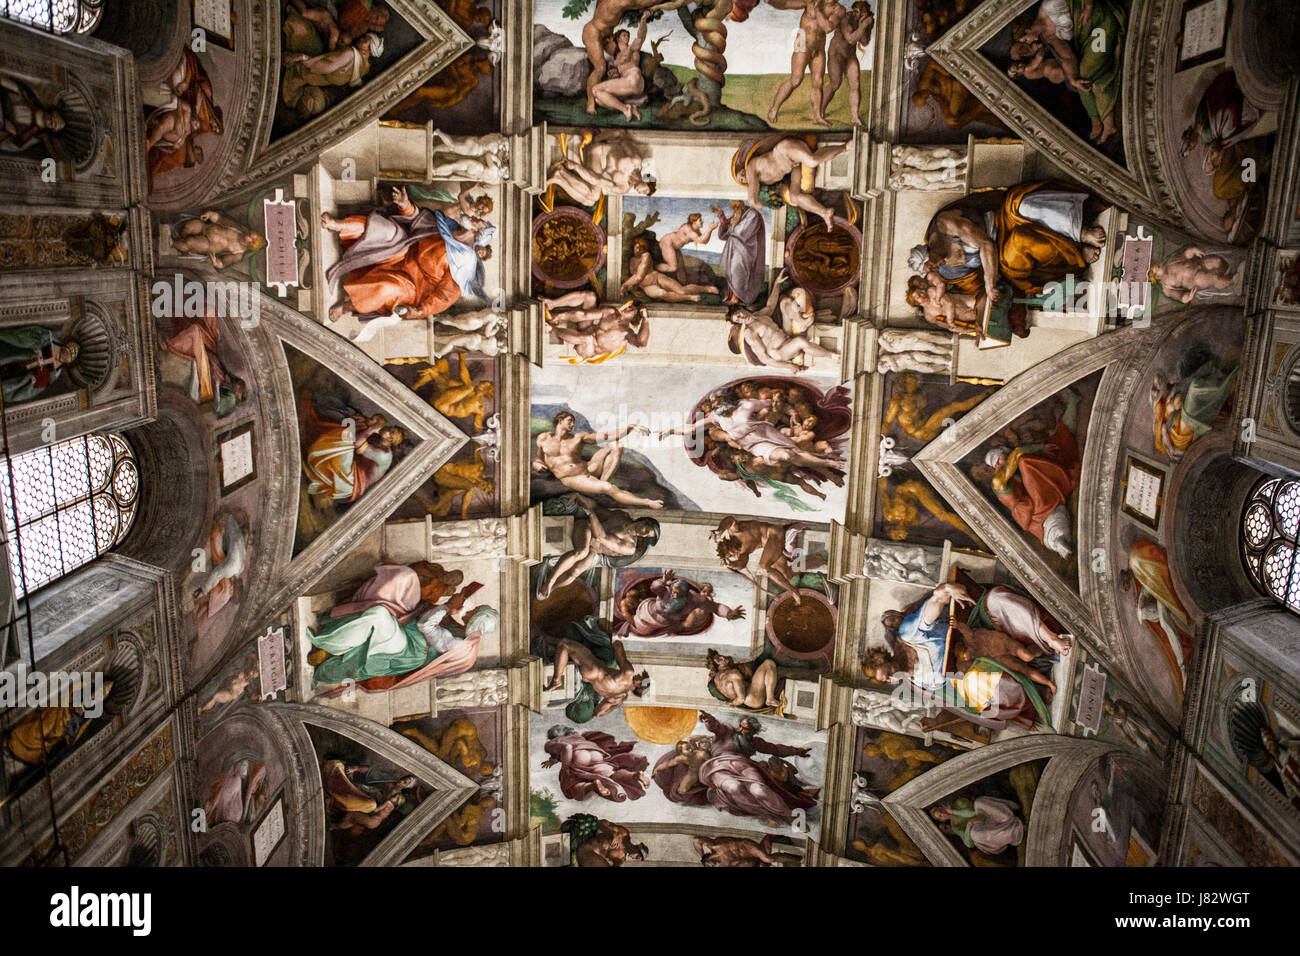 VATICAN CITY, ROME - MARCH 02, 2016: Interior and architectural details of the Sistine chapel, March 02, 2016, Vatican city, Rome, Italy. Stock Photo